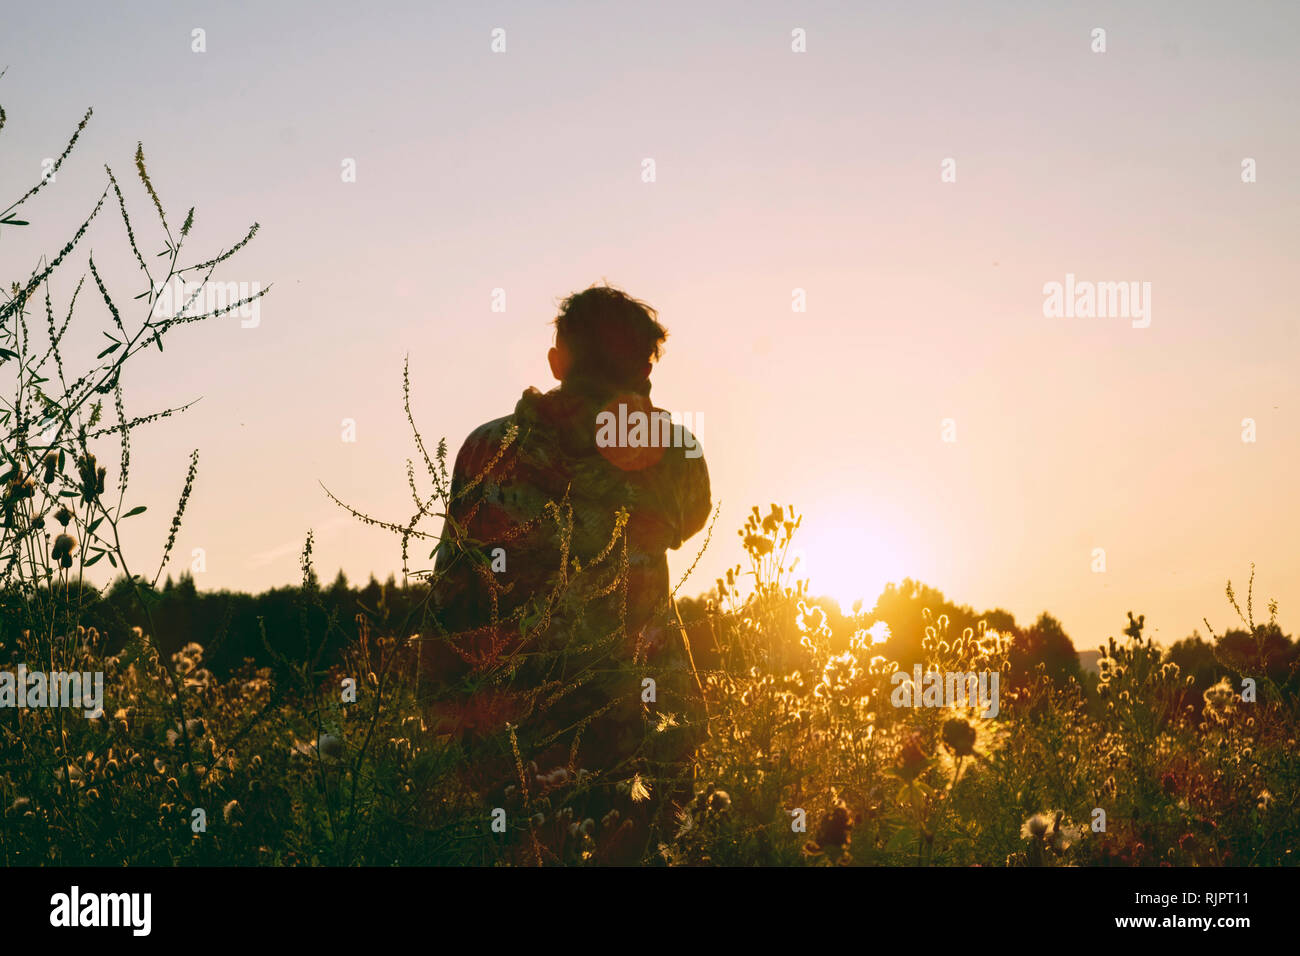 Man in wildflower field watching sunset, rear view Stock Photo